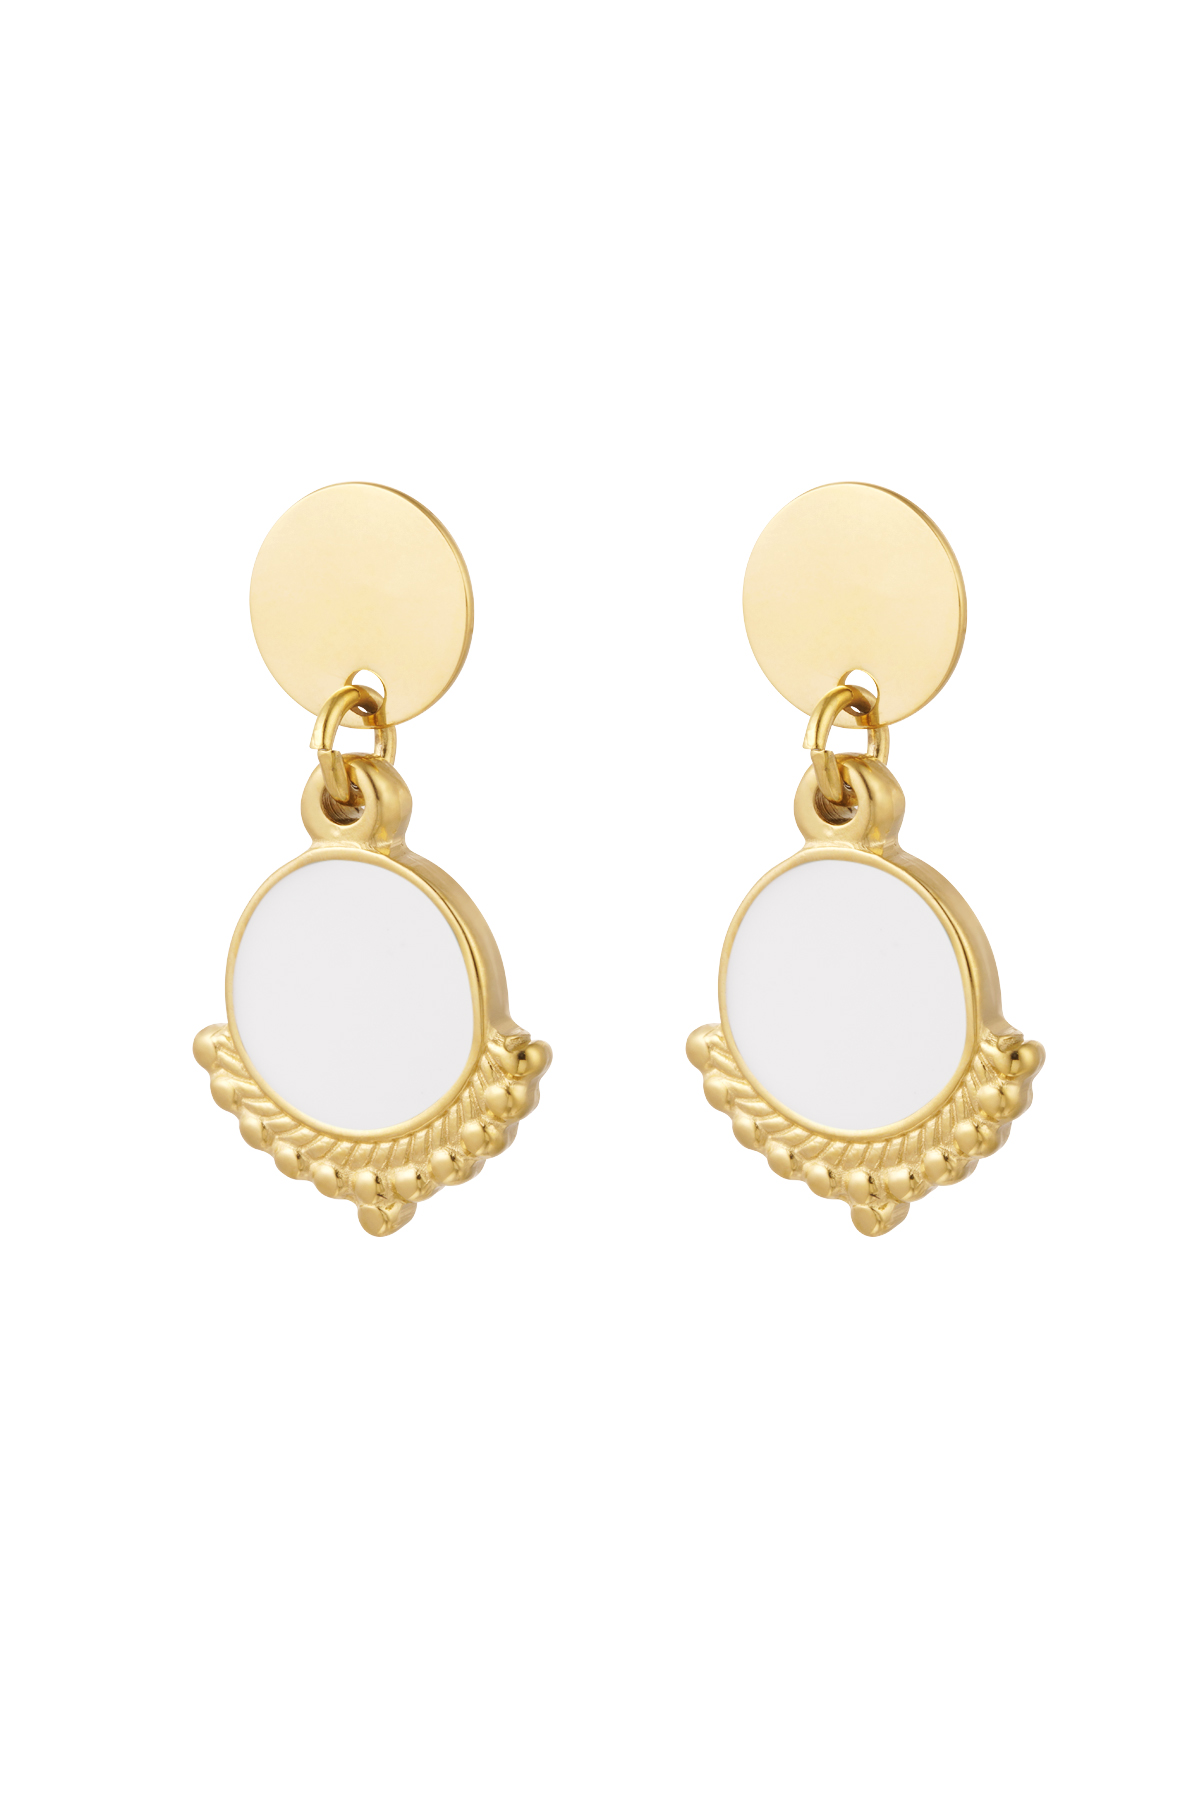 Earrings elegant with color - gold/white h5 